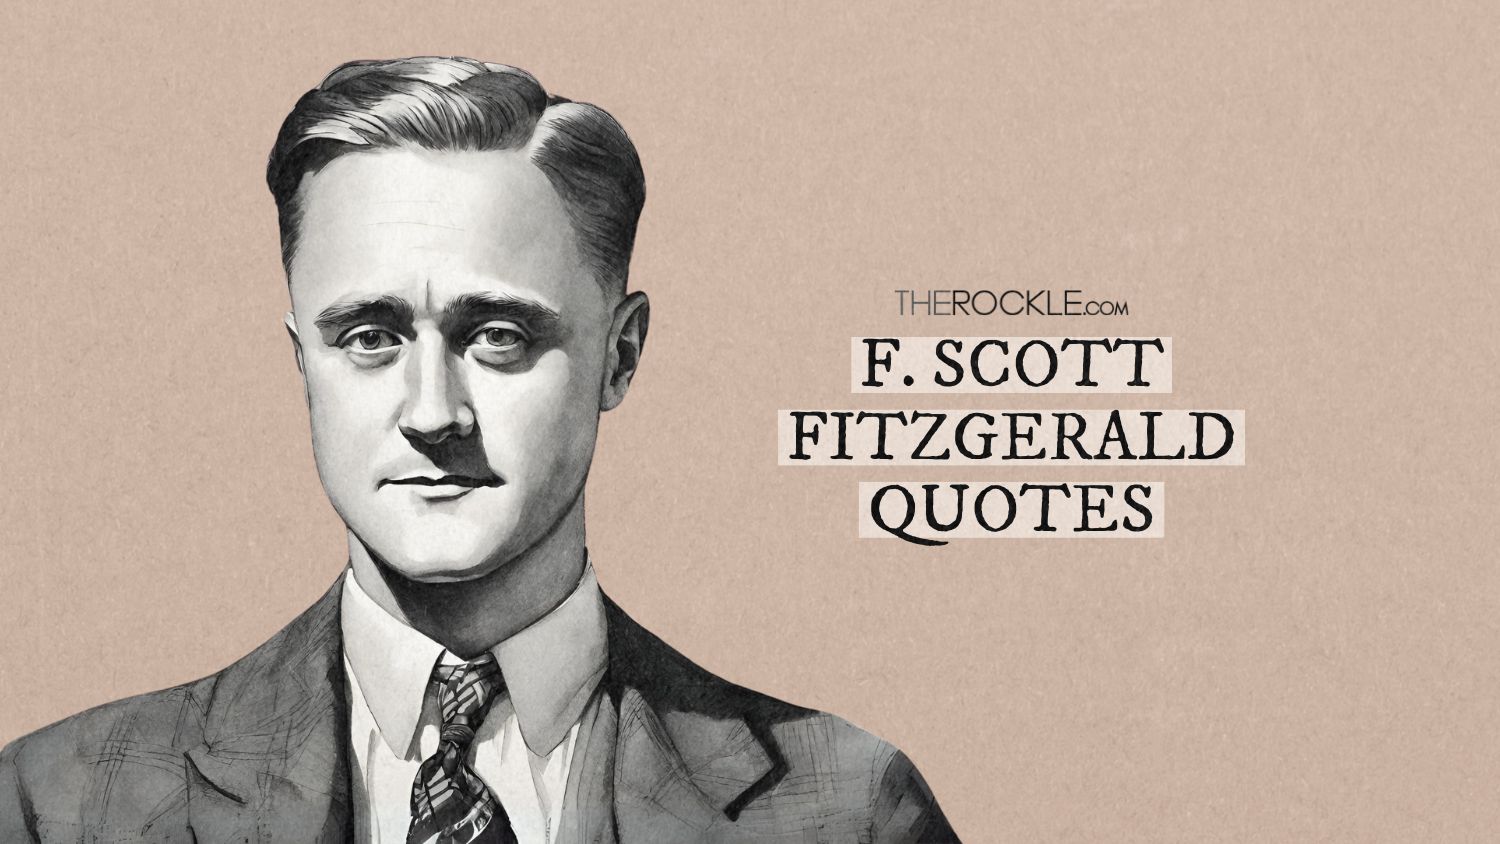 20 F. Scott Fitzgerald Quotes So Good, You’ll Want to Read Them Over and Over